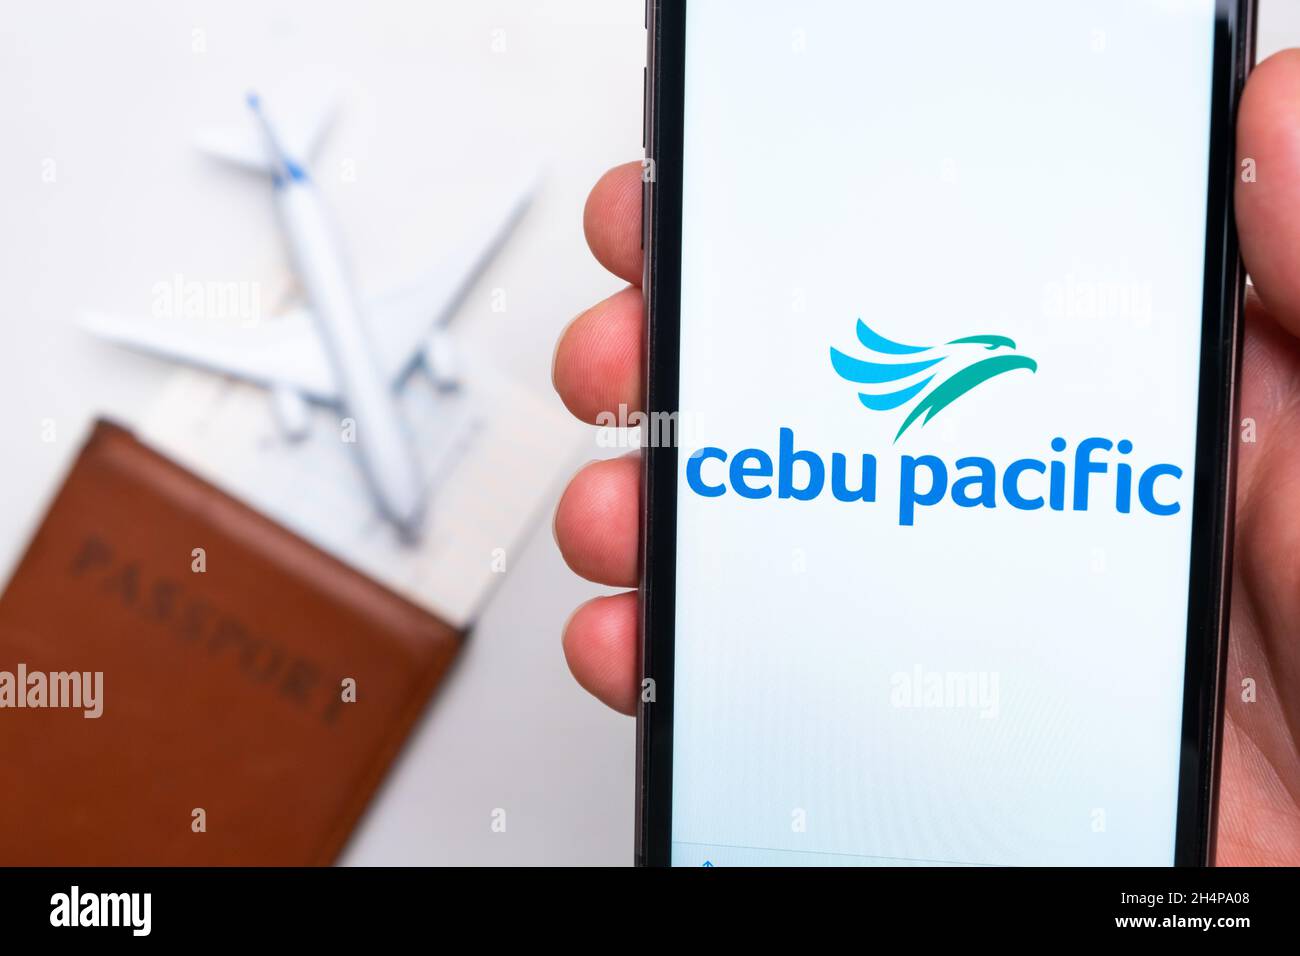 Cebu Pacific airlines logo on the screen of smartphone on the background of passport, ticket and plane, September 2021, San Francisco, USA Stock Photo